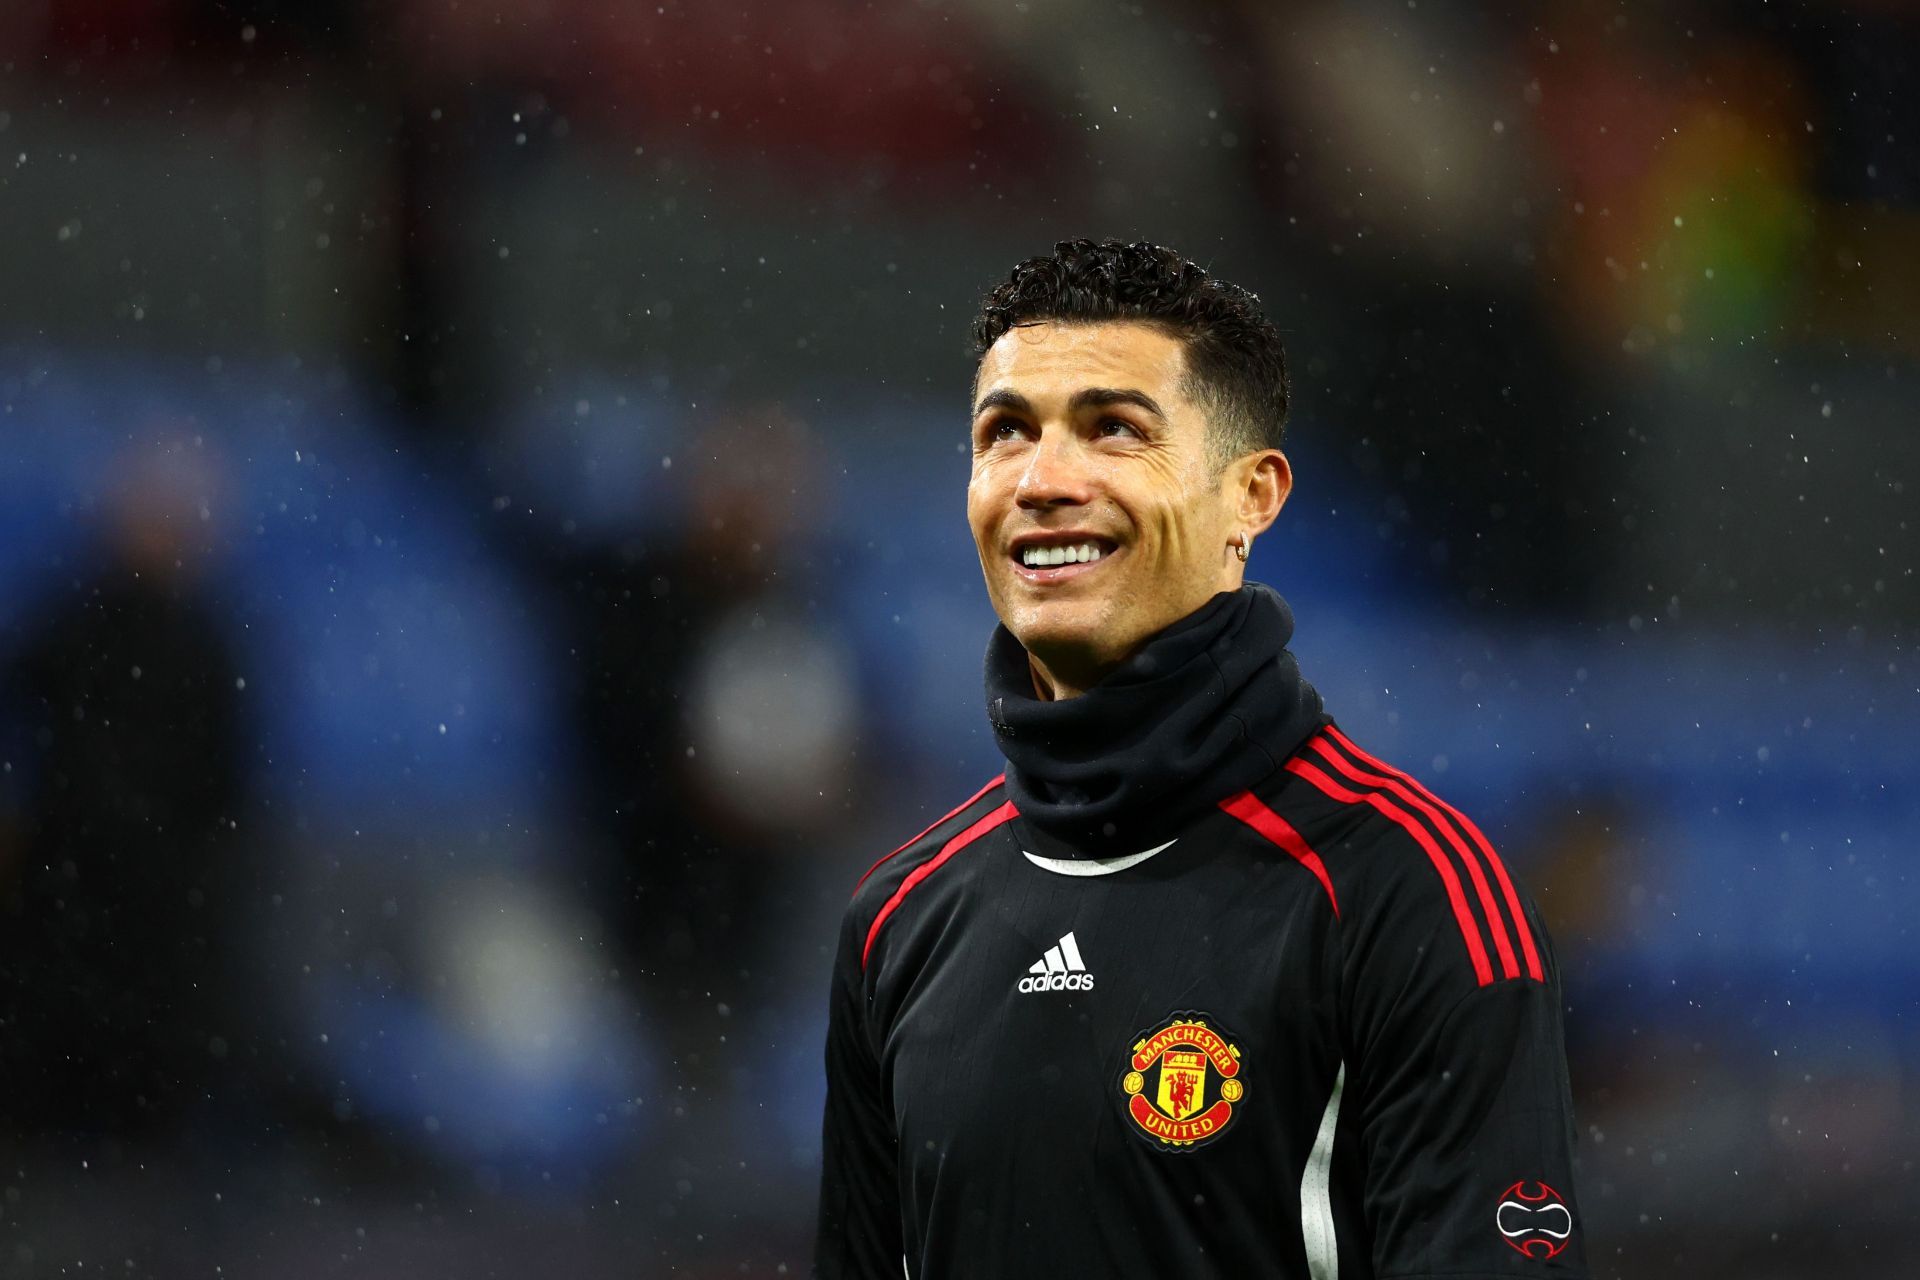 Cristiano Ronaldo is set to return to league action. (Photo by Clive Brunskill/Getty Images)